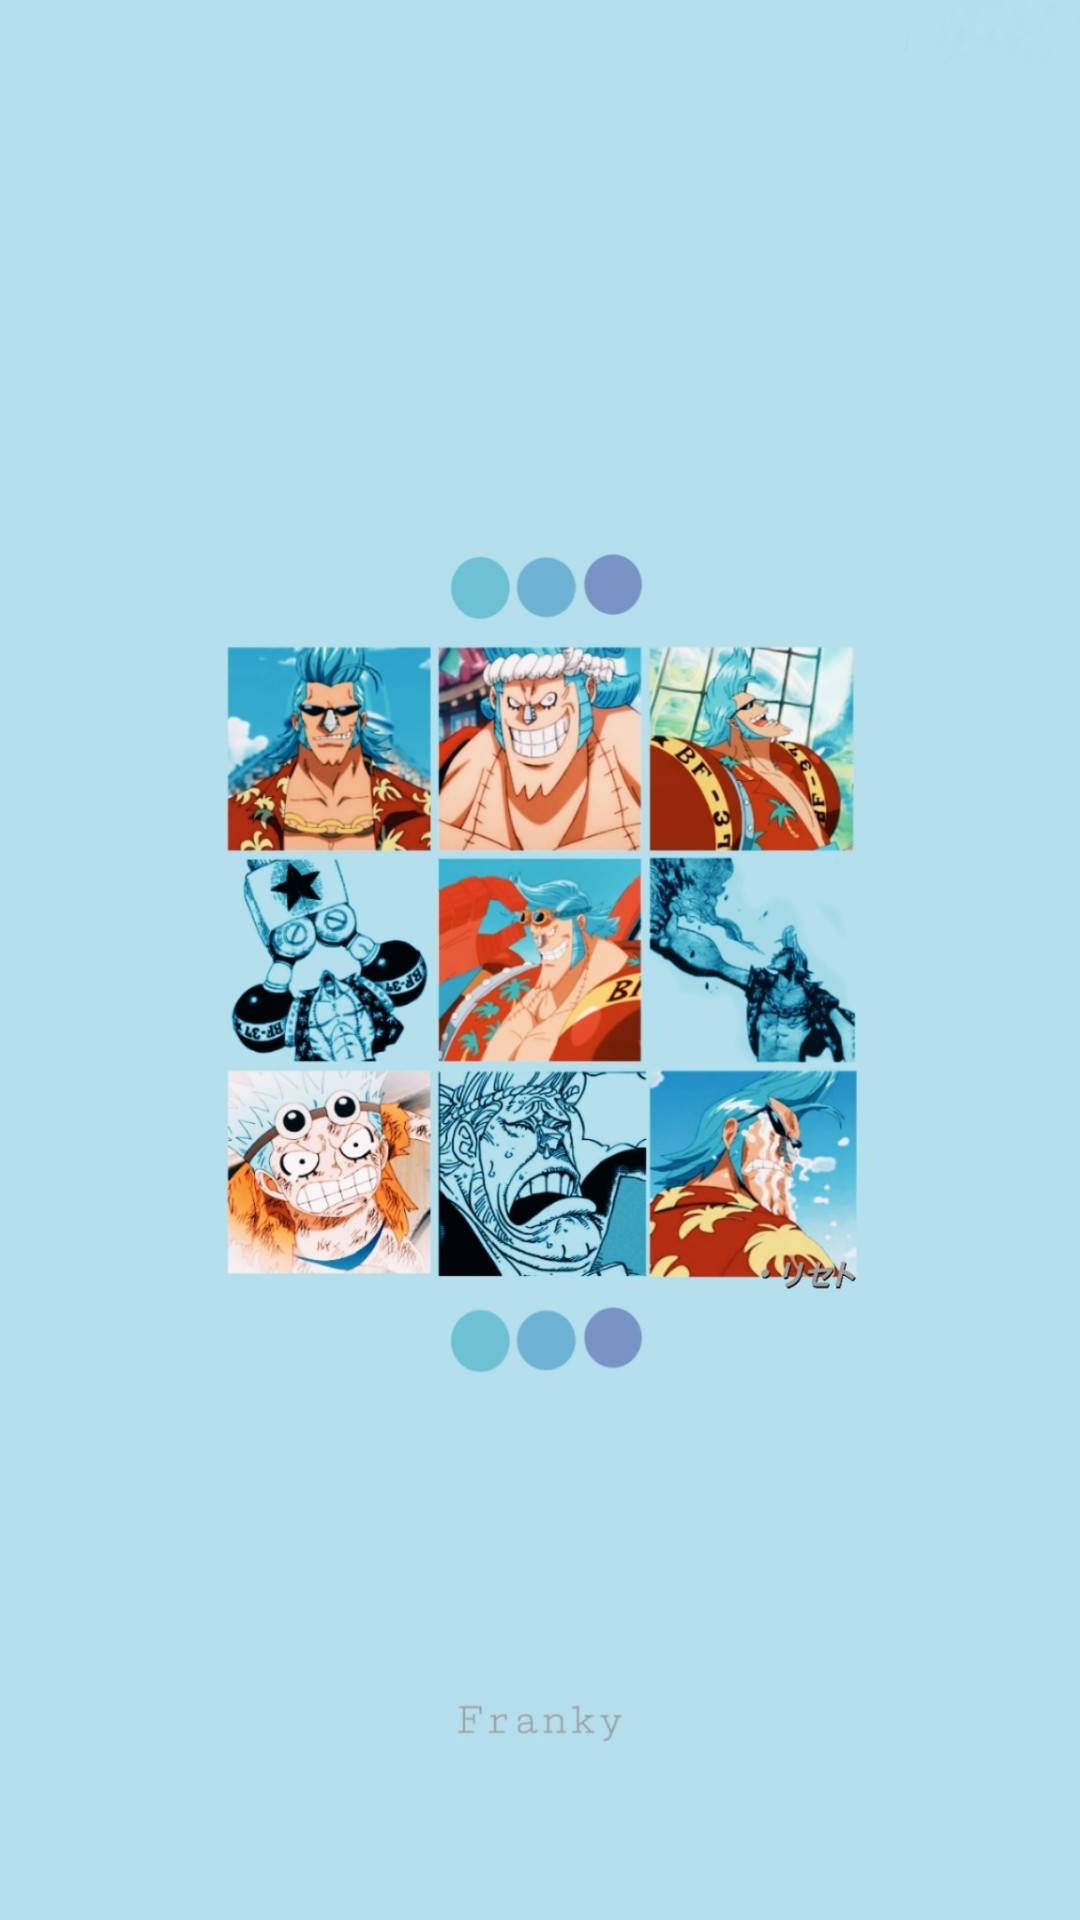 Franky One Piece Aesthetic Icon Collage Wallpaper